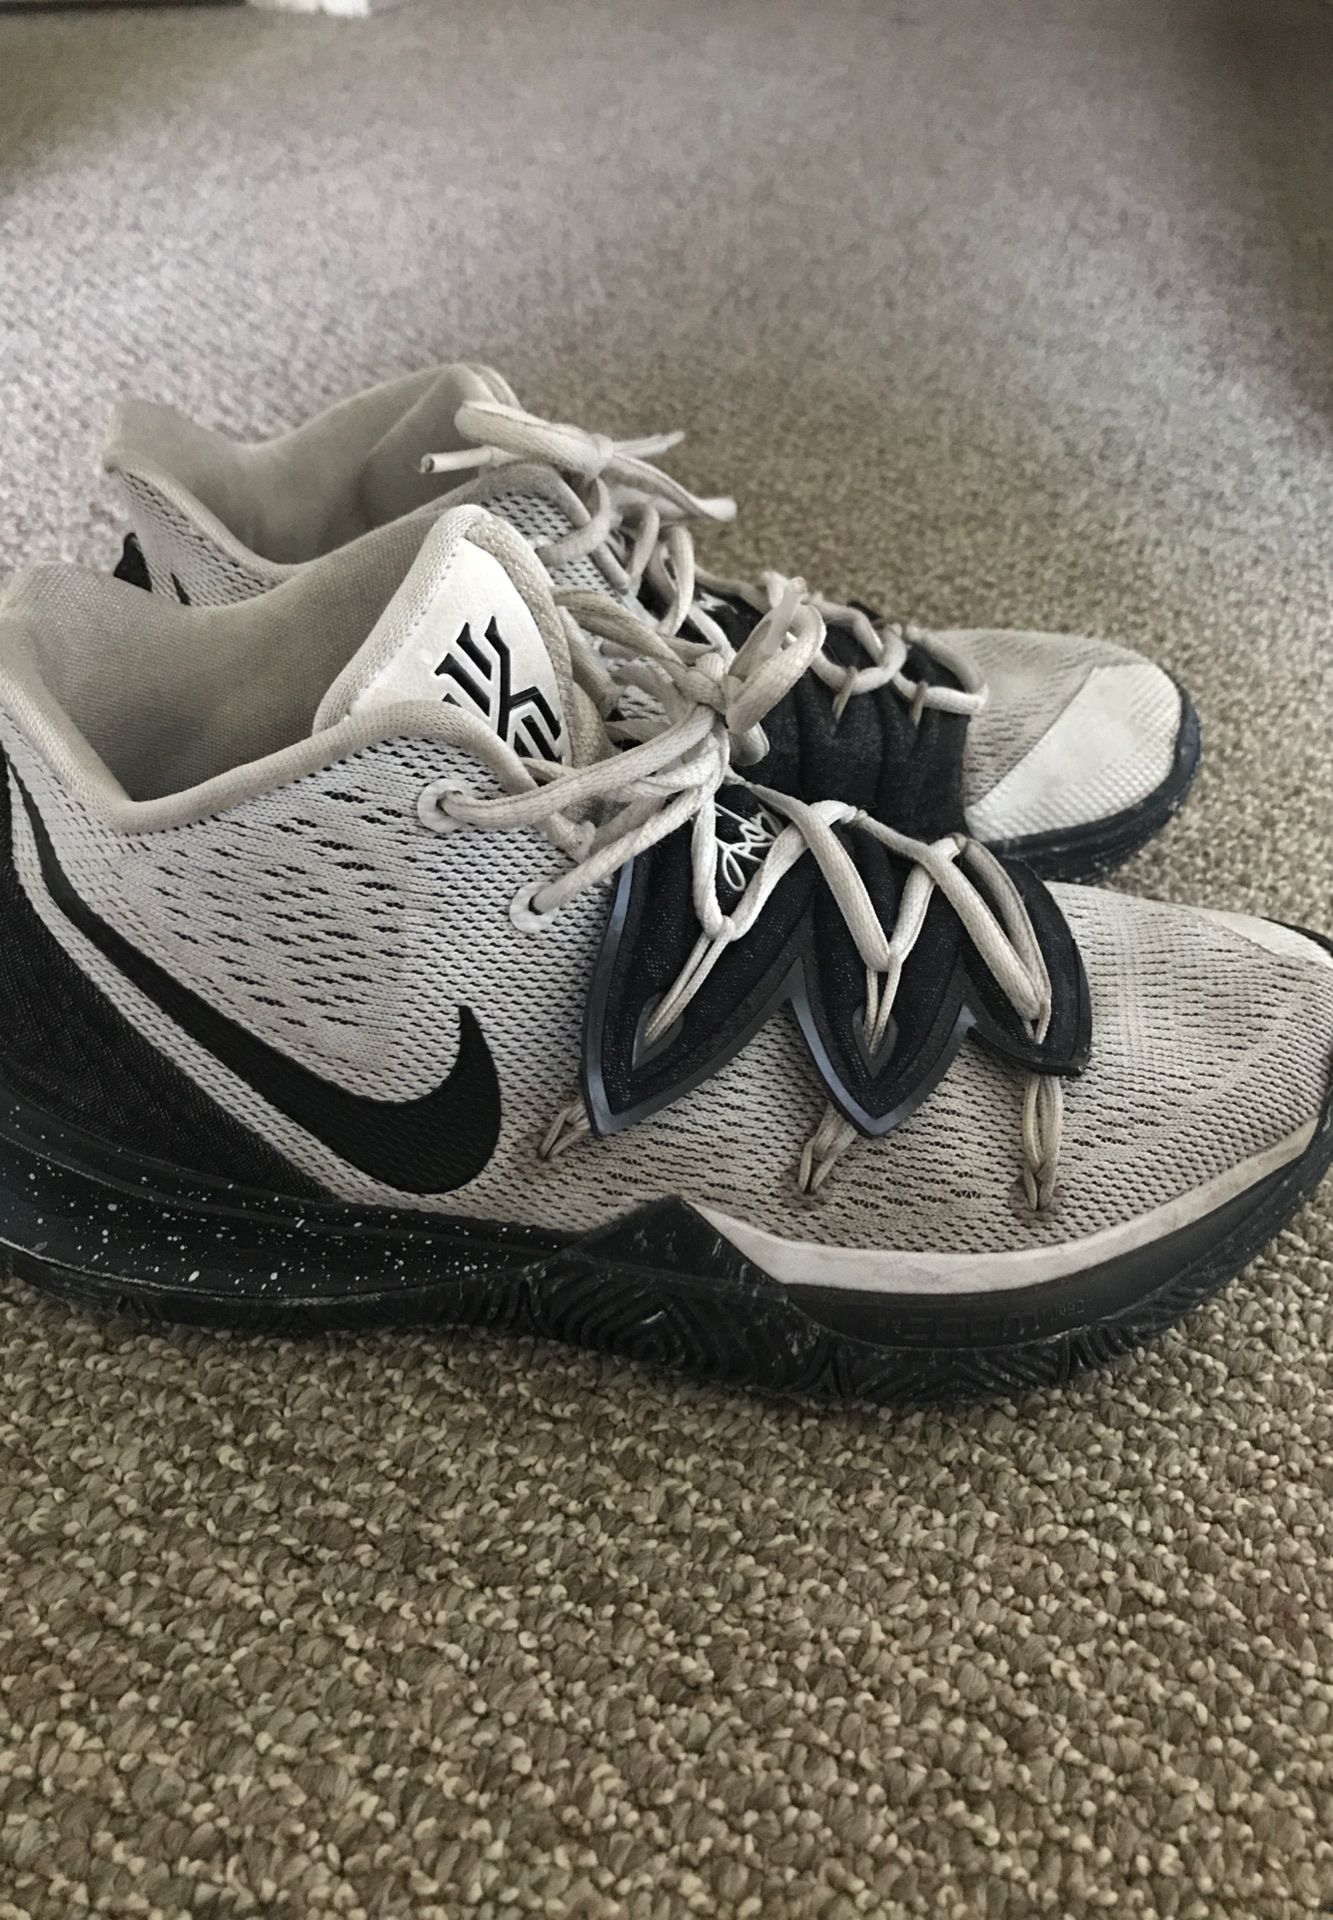 Nike Kyrie 5 Black and White Size 8